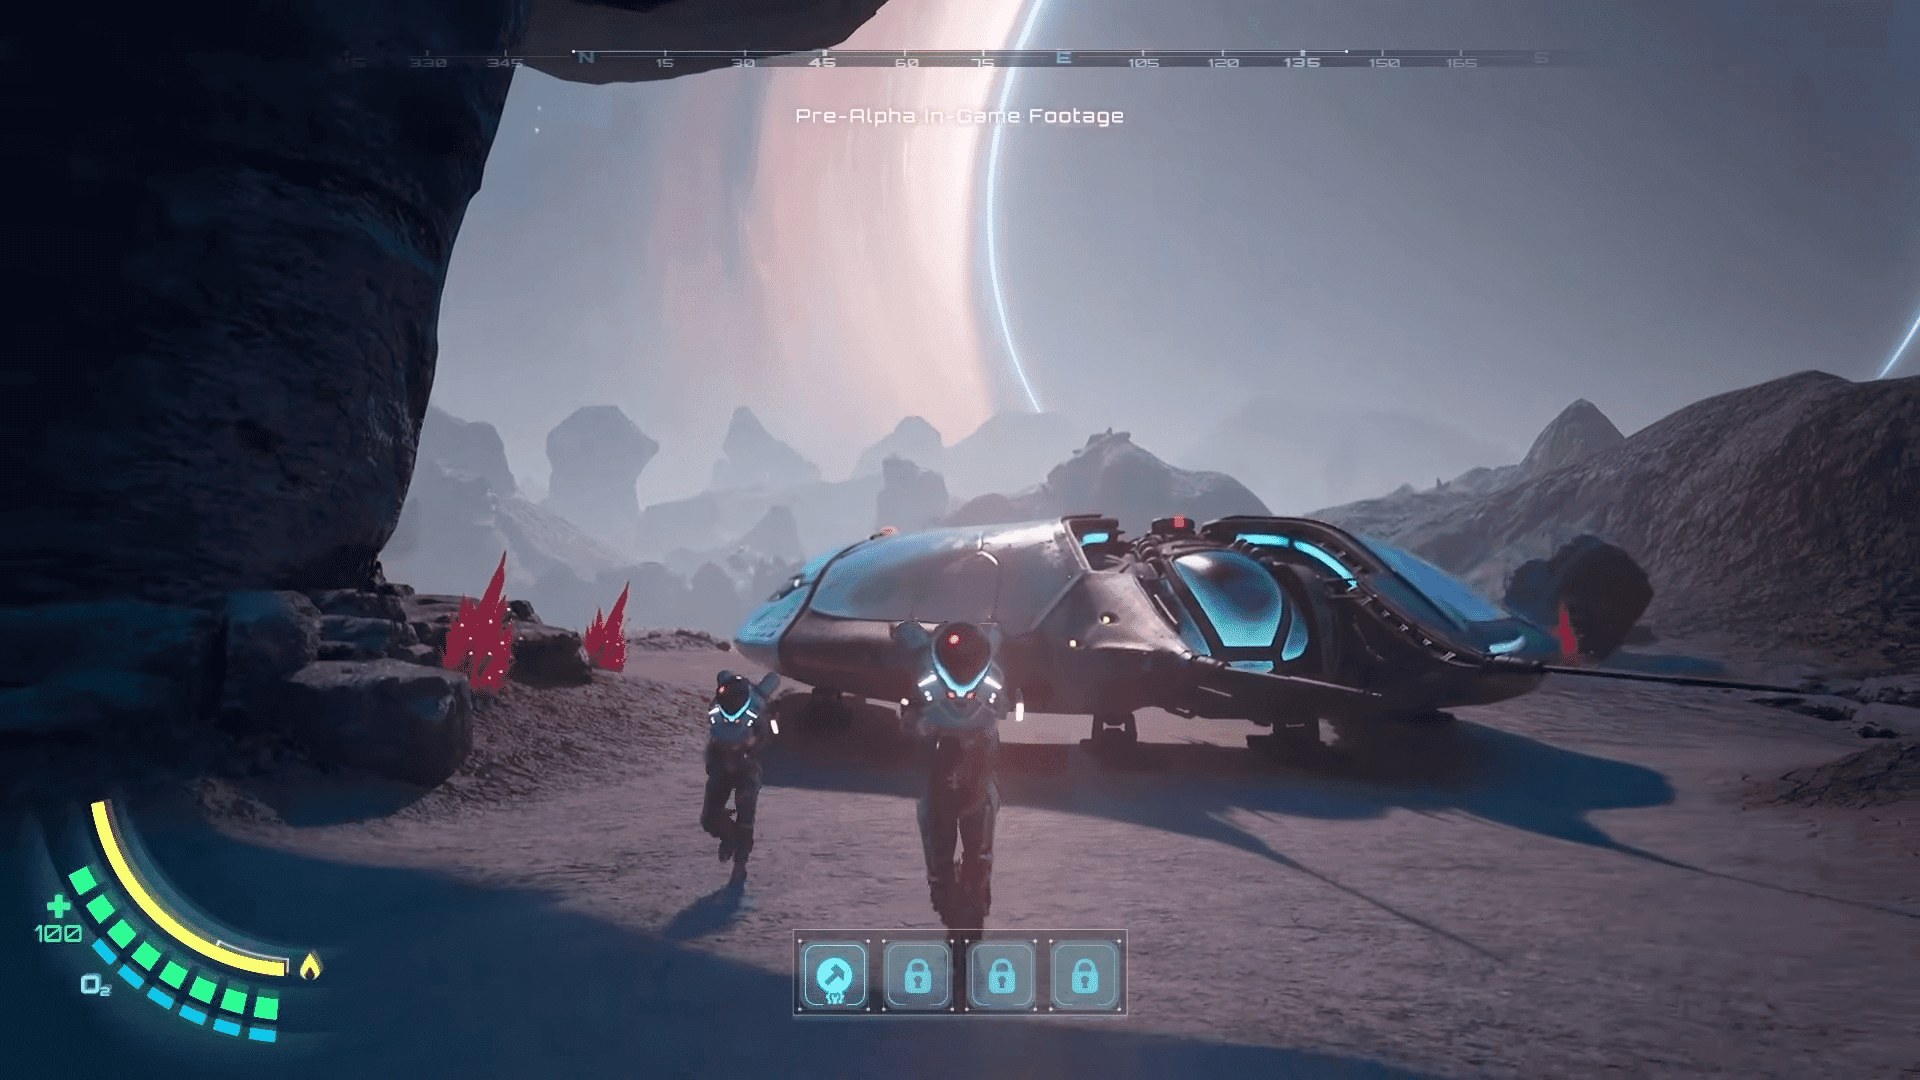 Providence, merges in shattered alien worlds. In this free-to-play web3 game, players build from scratch by gathering resources and crafting.